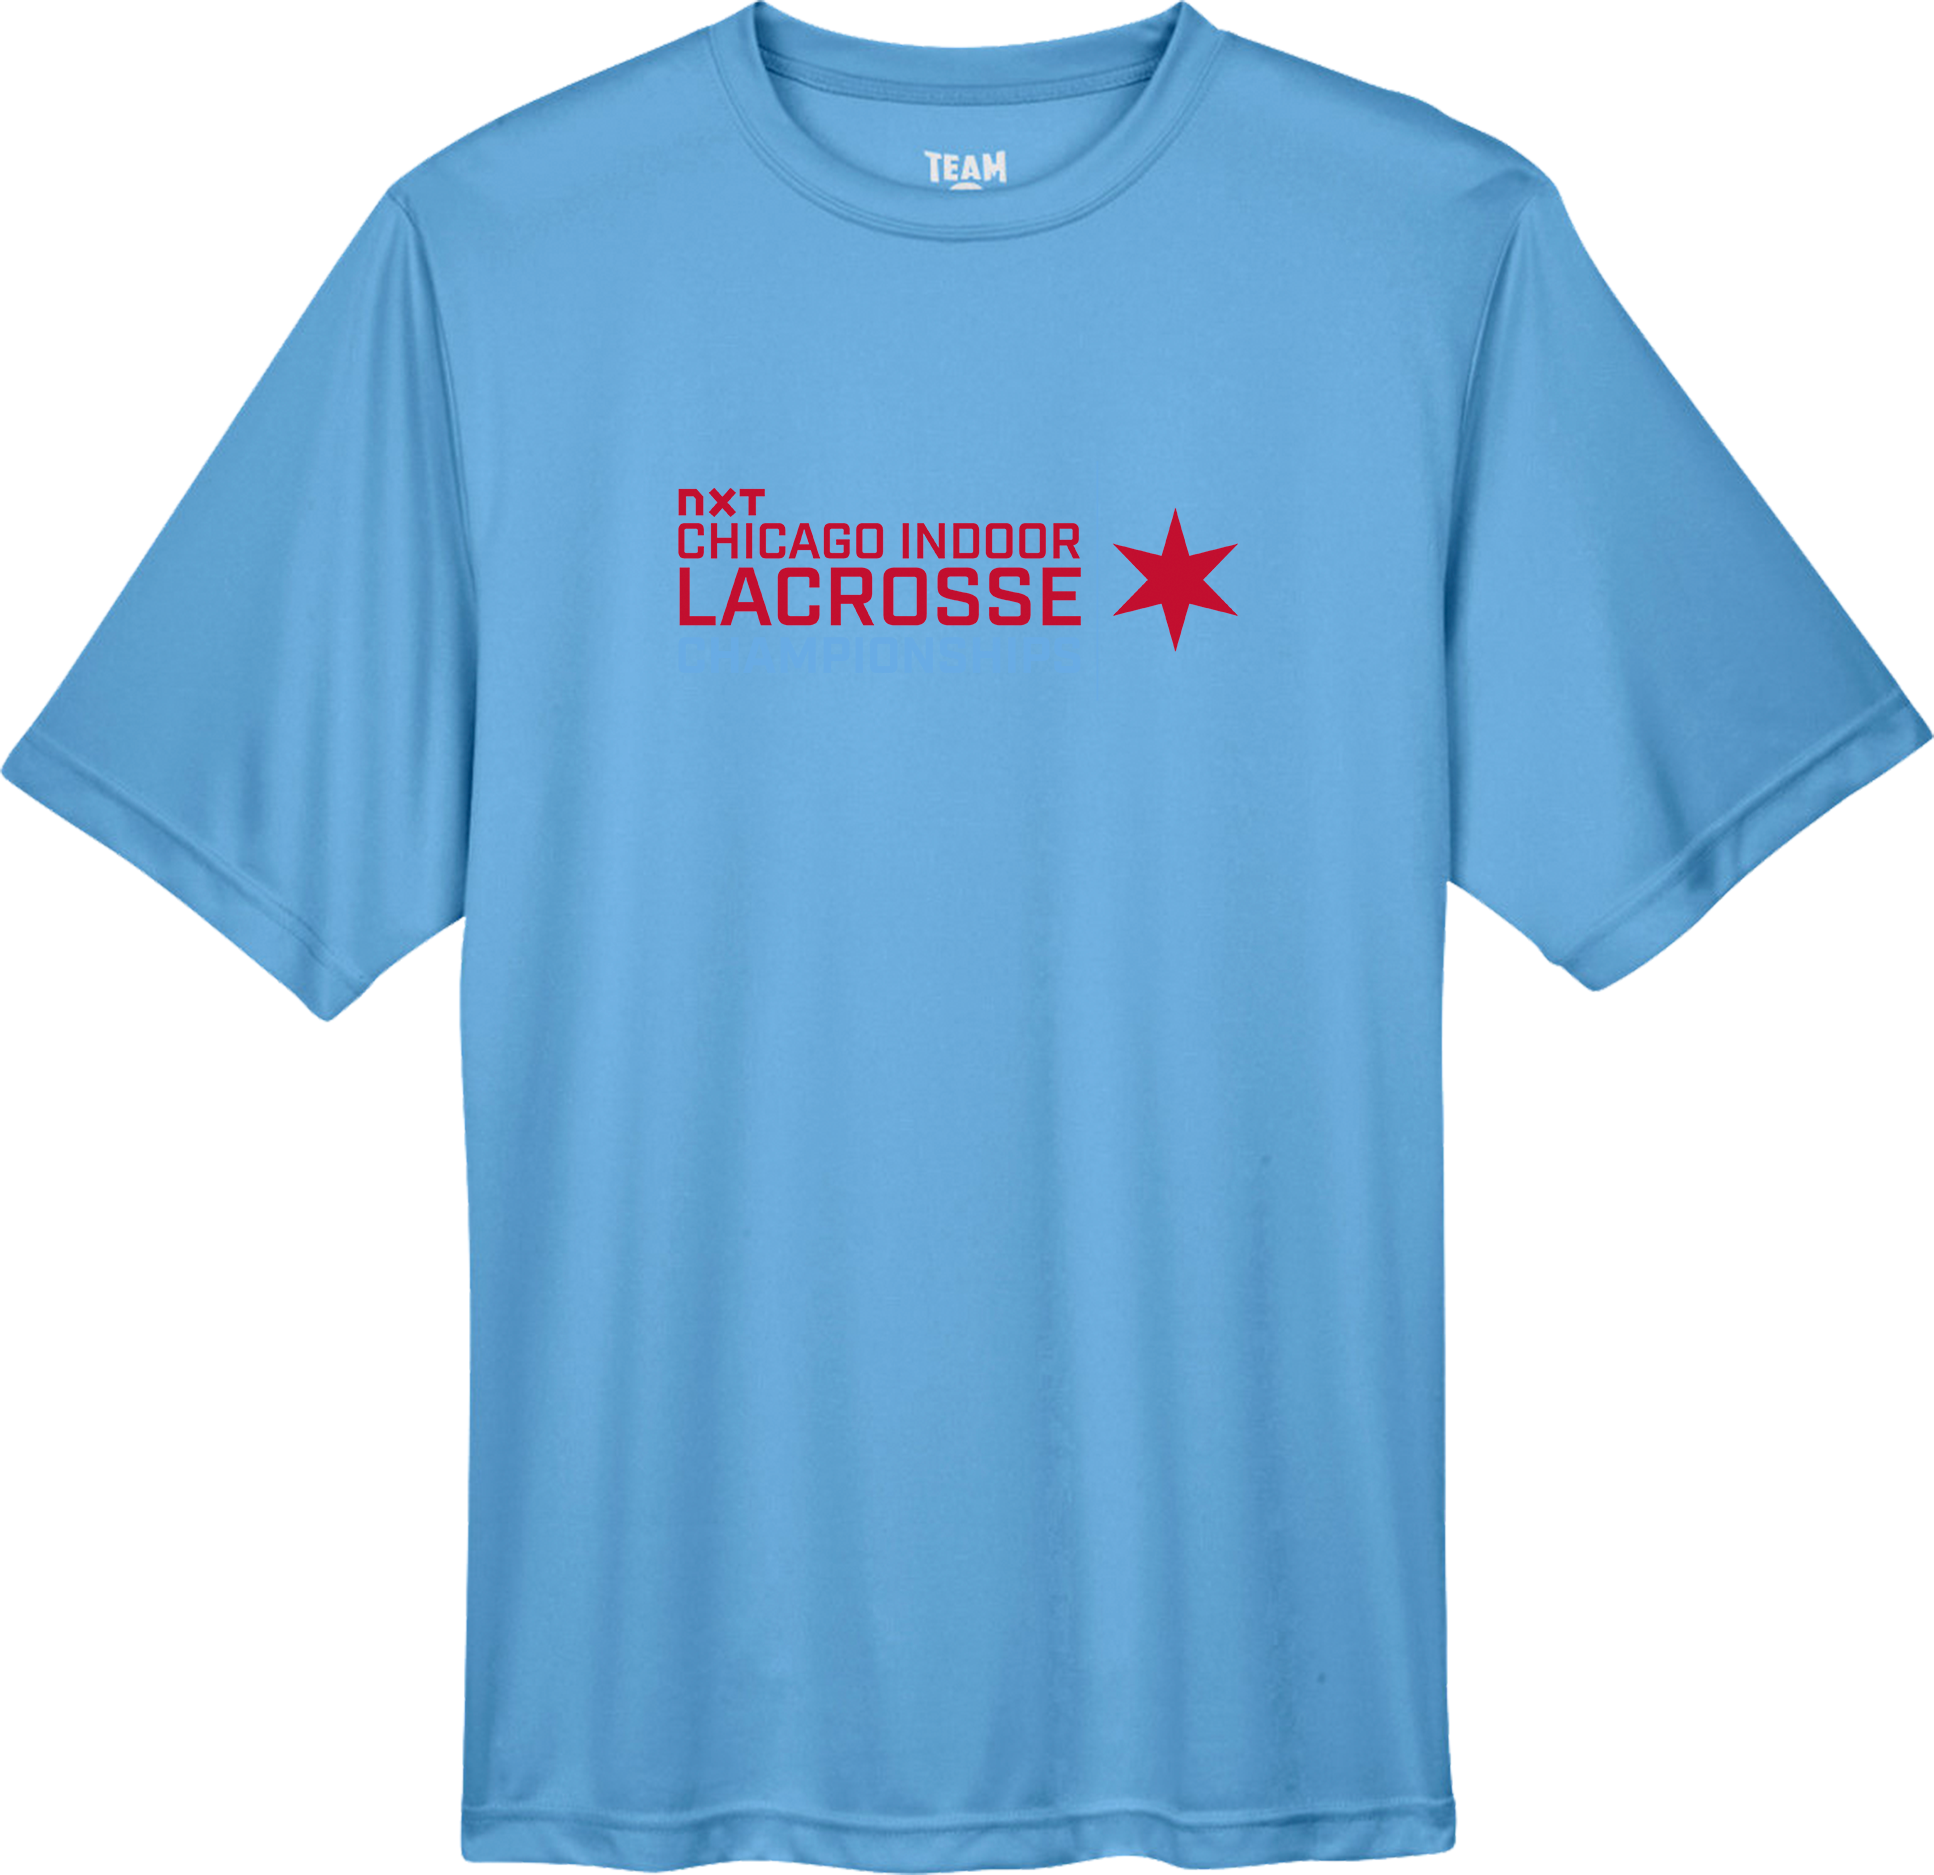 PERFORMANCE SHIRTS - 2023 Chicago Indoor Lacrosse Championships